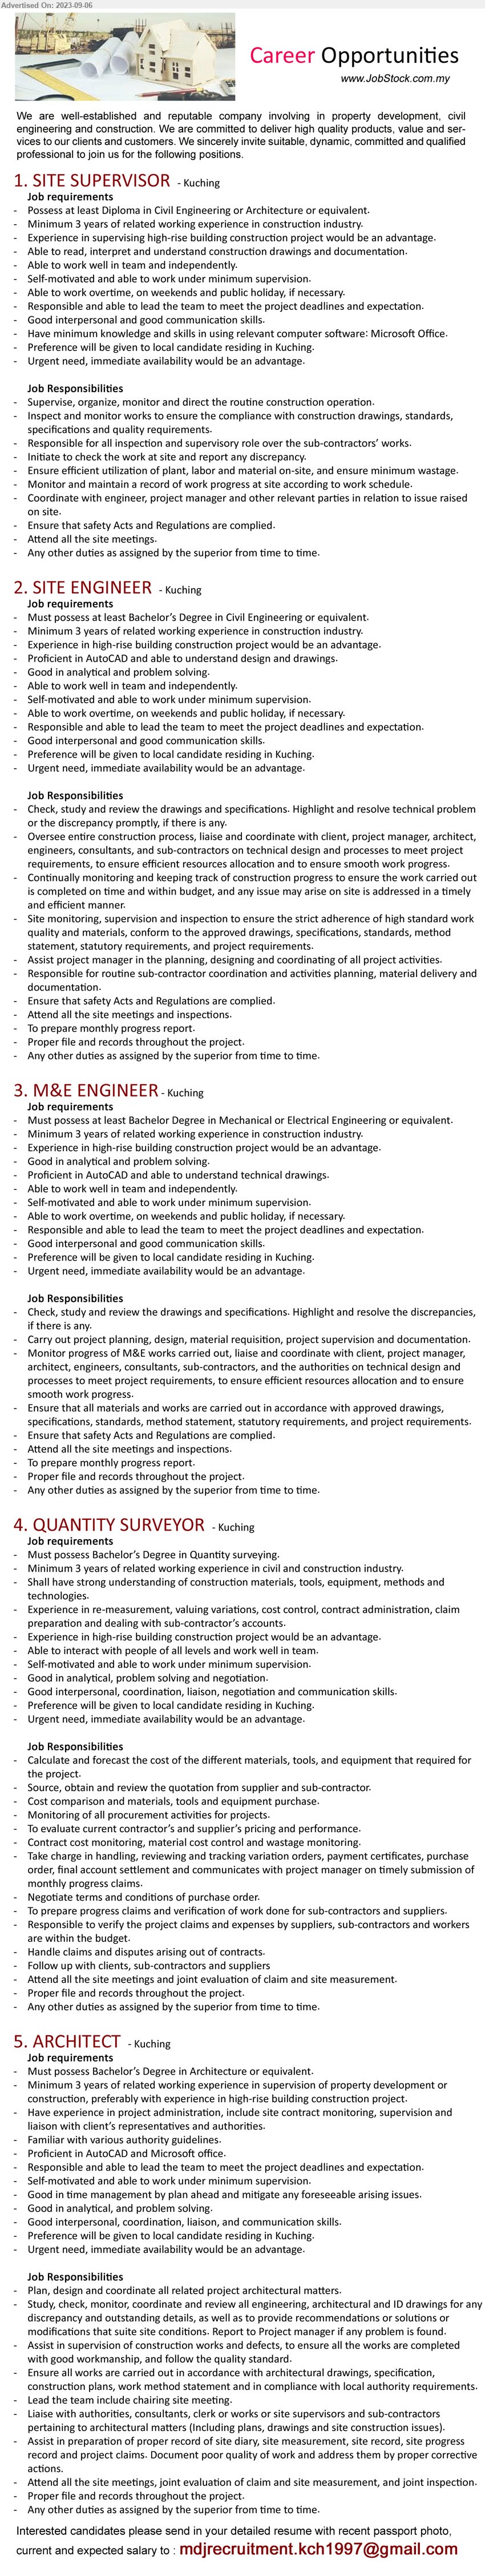 ADVERTISER - 1. SITE SUPERVISOR (Kuching), Diploma in Civil Engineering or Architecture, 3 yrs. exp.,...
2. SITE ENGINEER (Kuching), Bachelor’s Degree in Civil Engineering, 3 yrs. exp.,...
3. M&E ENGINEER (Kuching), Bachelor Degree in Mechanical or Electrical Engineering, 3 yrs. exp.,...
4. QUANTITY SURVEYOR (Kuching), Bachelor’s Degree in Quantity surveying, 3 yrs. exp....
5. ARCHITECT  (Kuching), Bachelor’s Degree in Architecture, 3 yrs. exp.,...
Email resume to ...